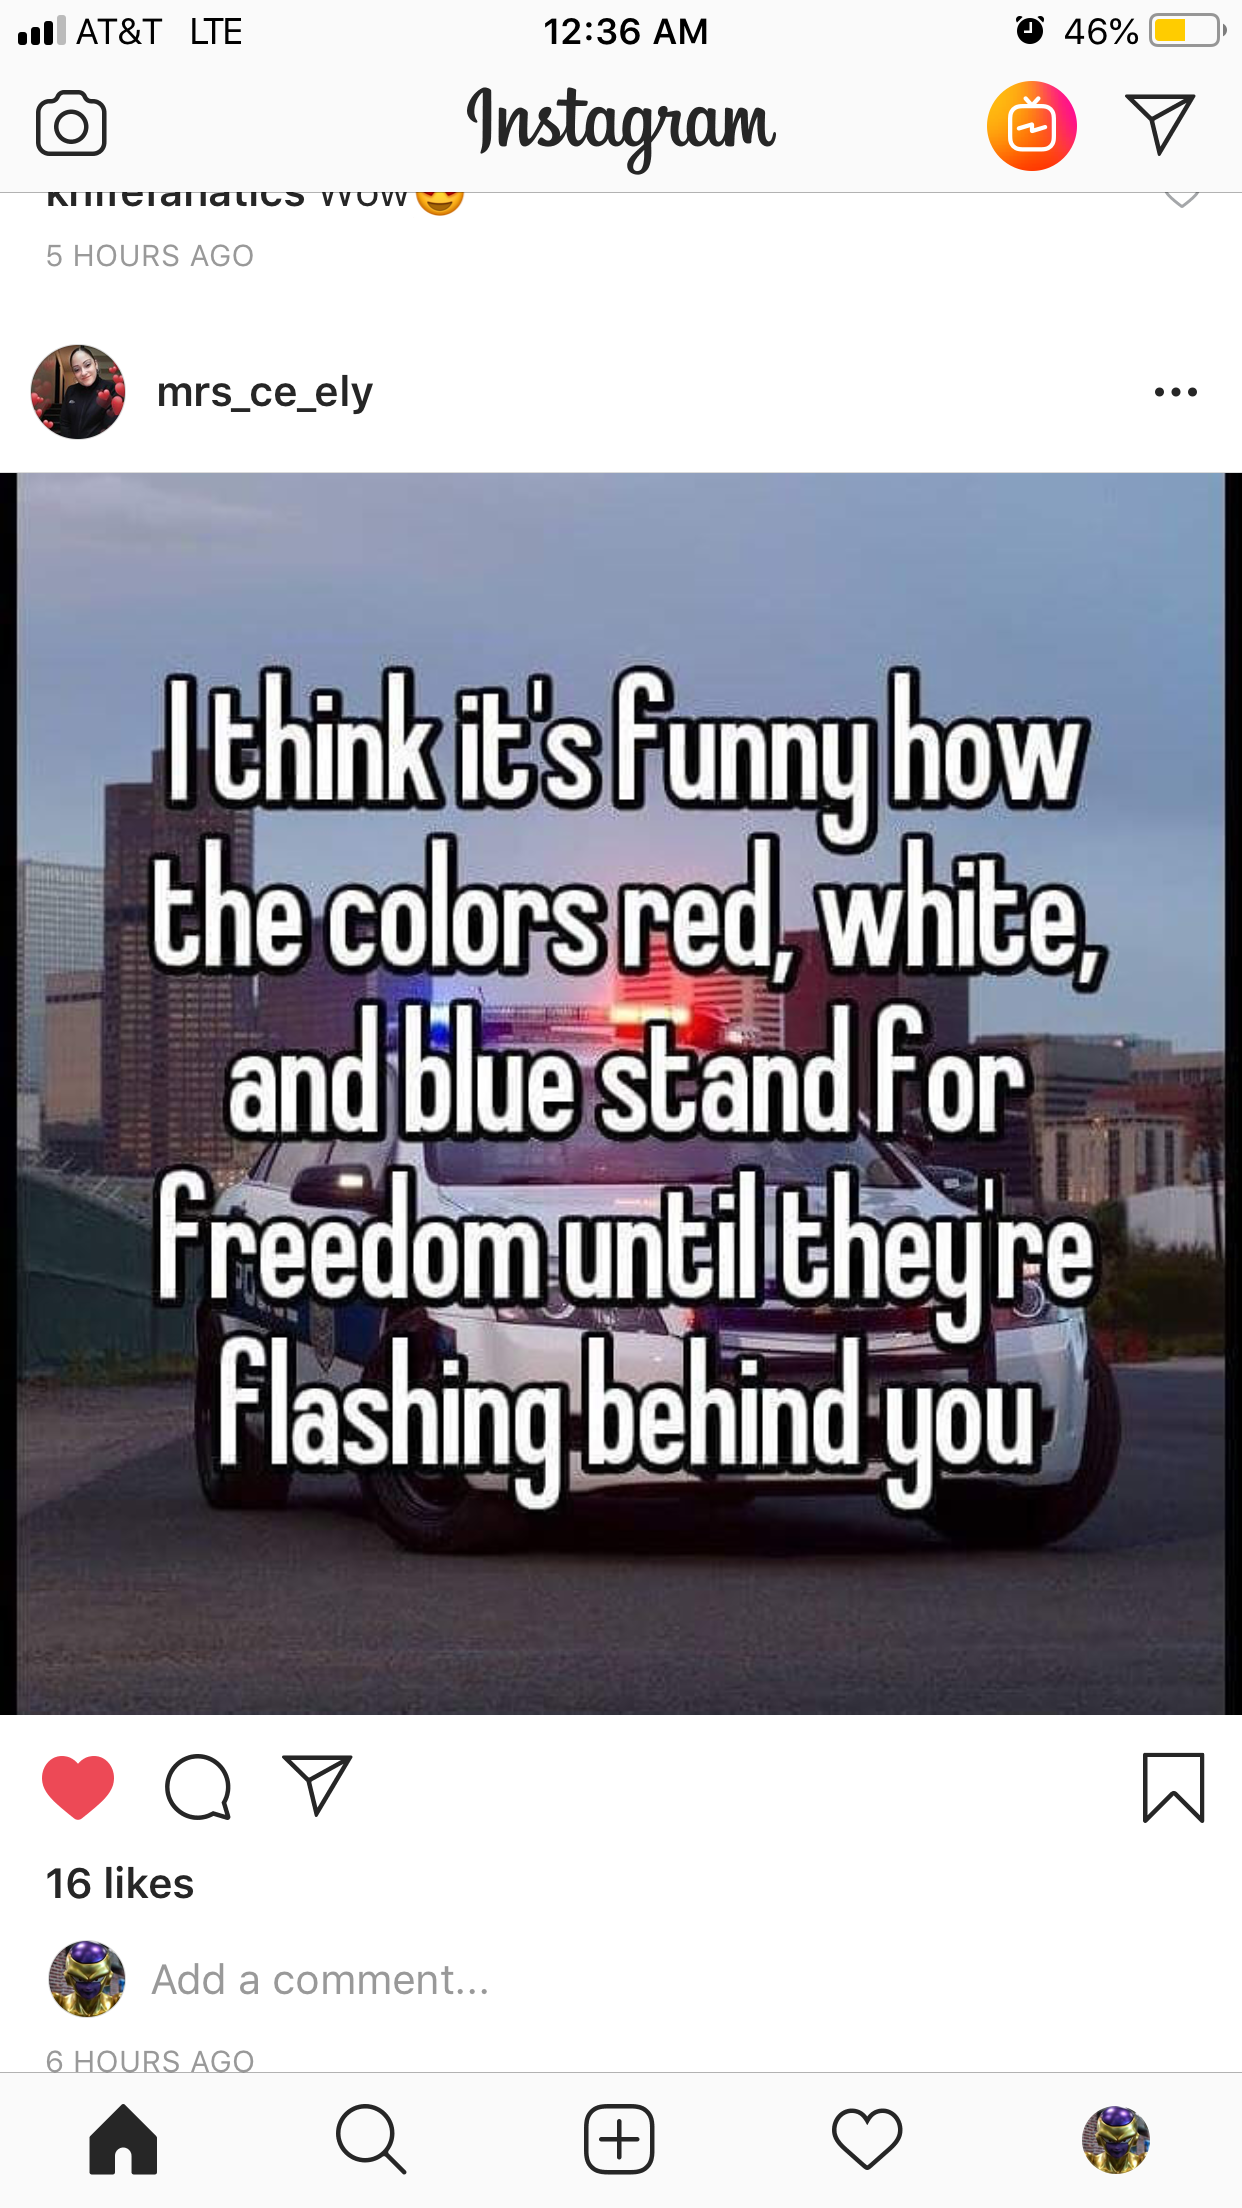 random pic instagram - At&T Lte 46% Instagram Ricciugo Voy E Hours Ago mrs_ce_ely I think it's funny how the colorsred white and blue stand for freedom until theyre Flashing behind you o o 16 Add a comment.. Hours Ago